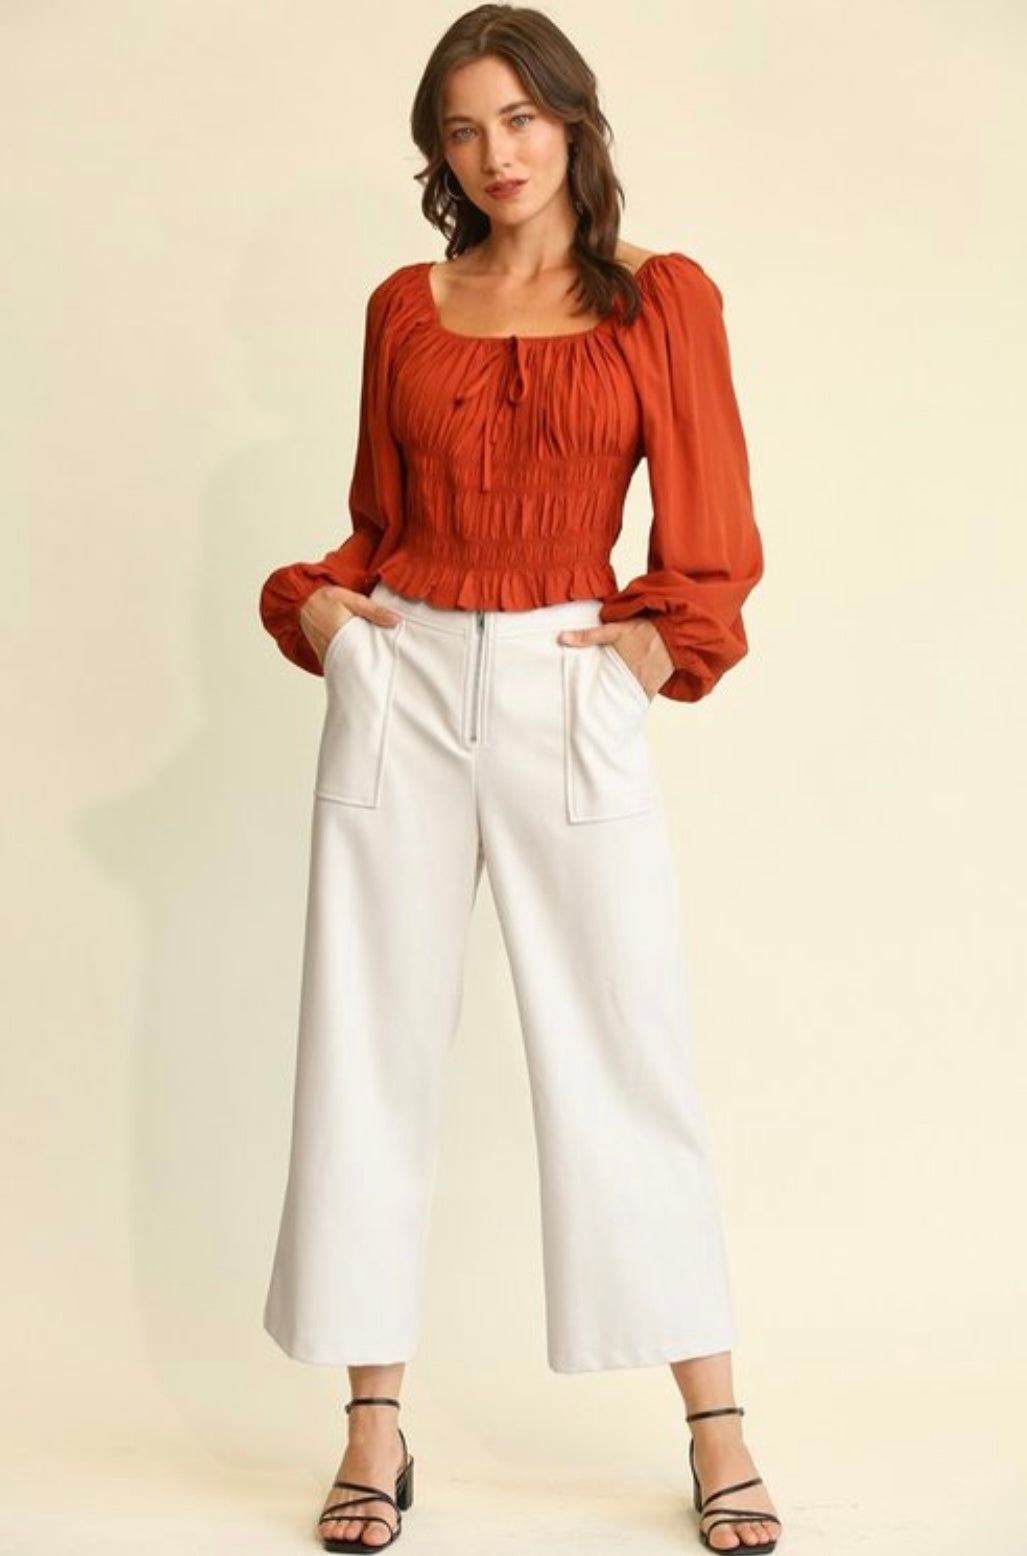 Frannie Faux Leather Midi Pants - Corinne Boutique Family Owned and Operated USA